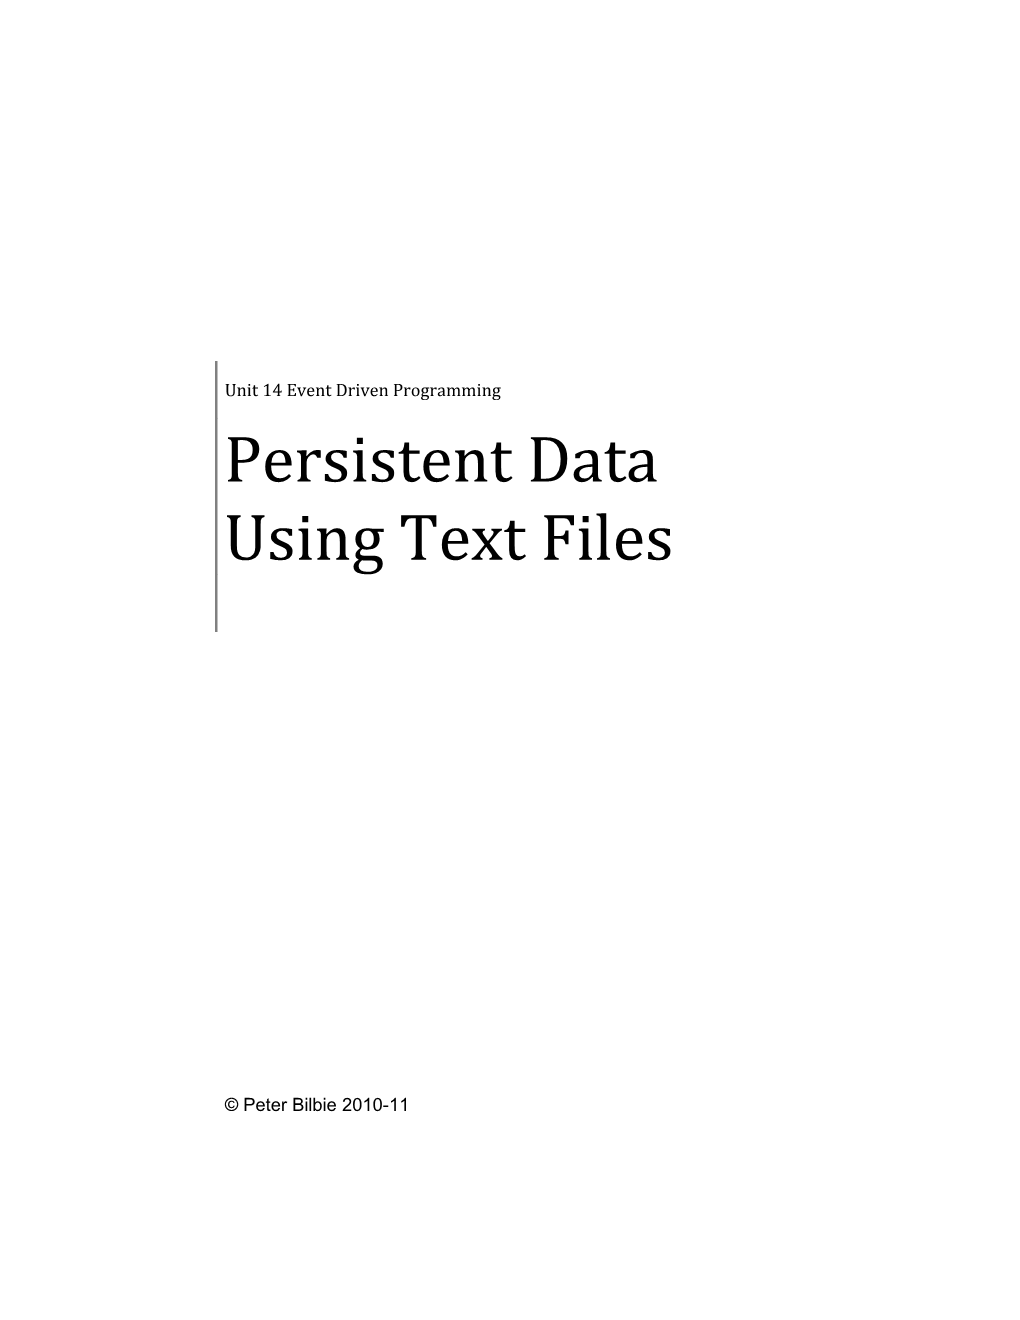 Persistent Data Using Text Files